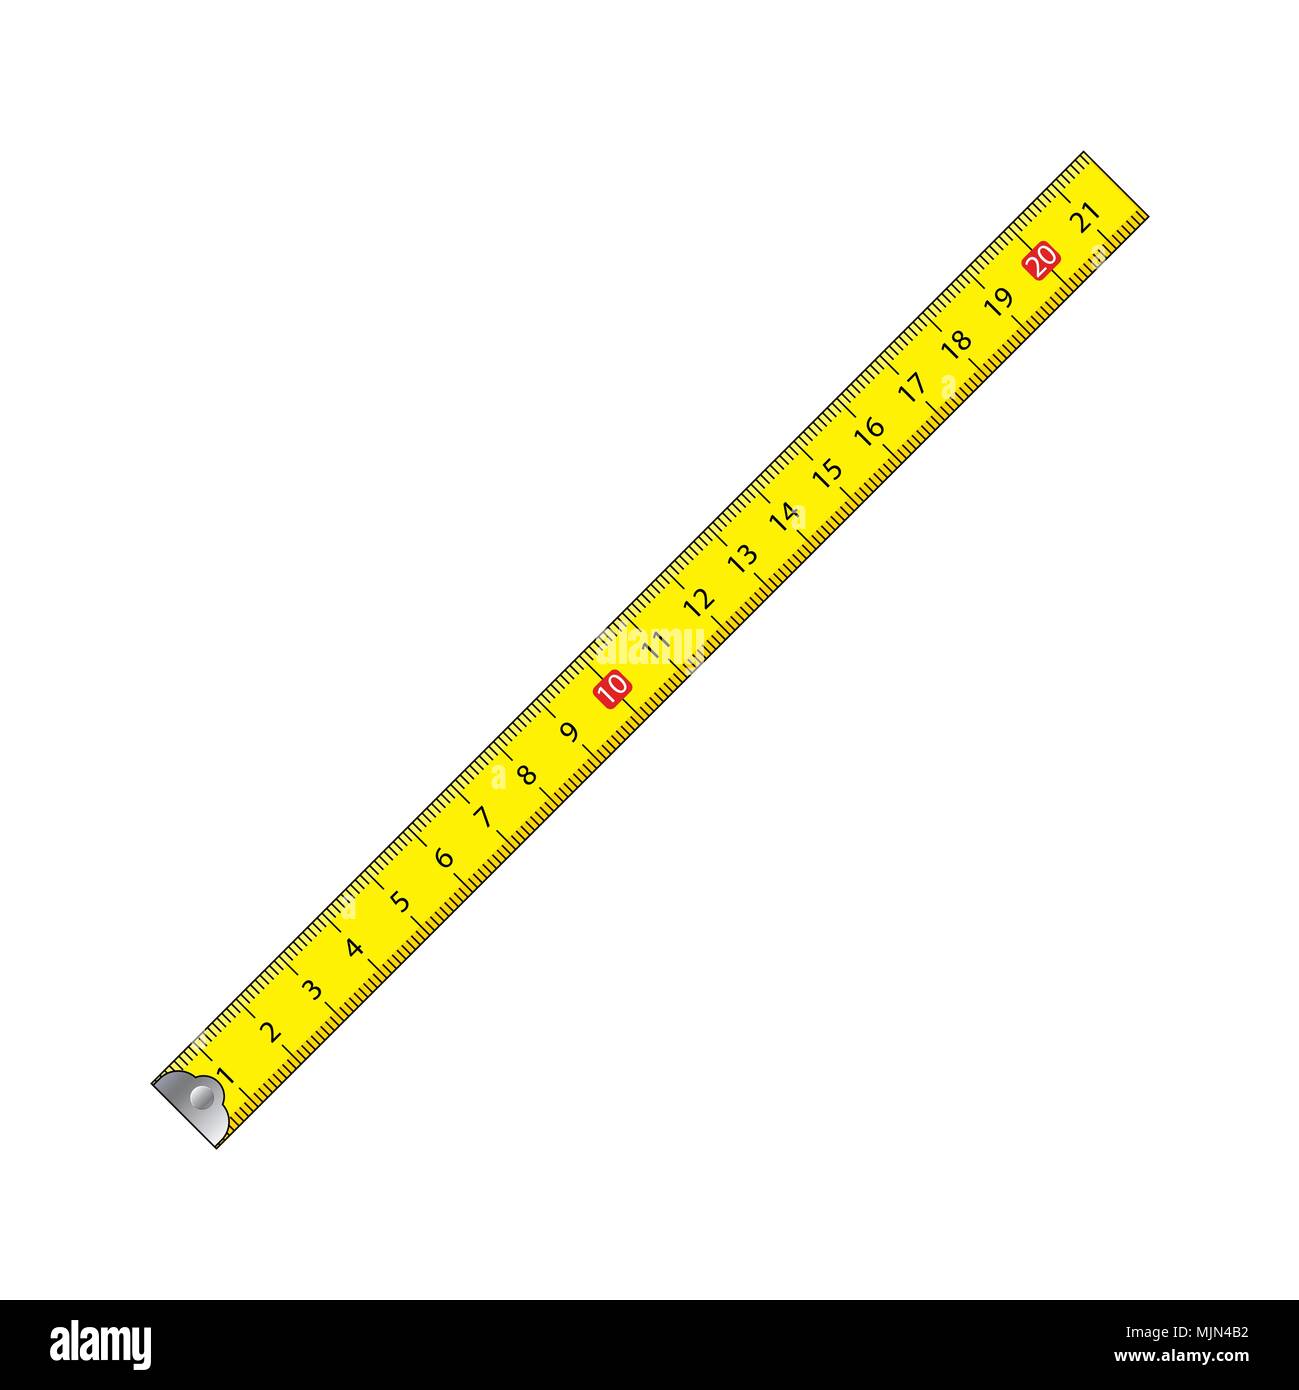 cartoon measure tape isolated on white background Stock Vector